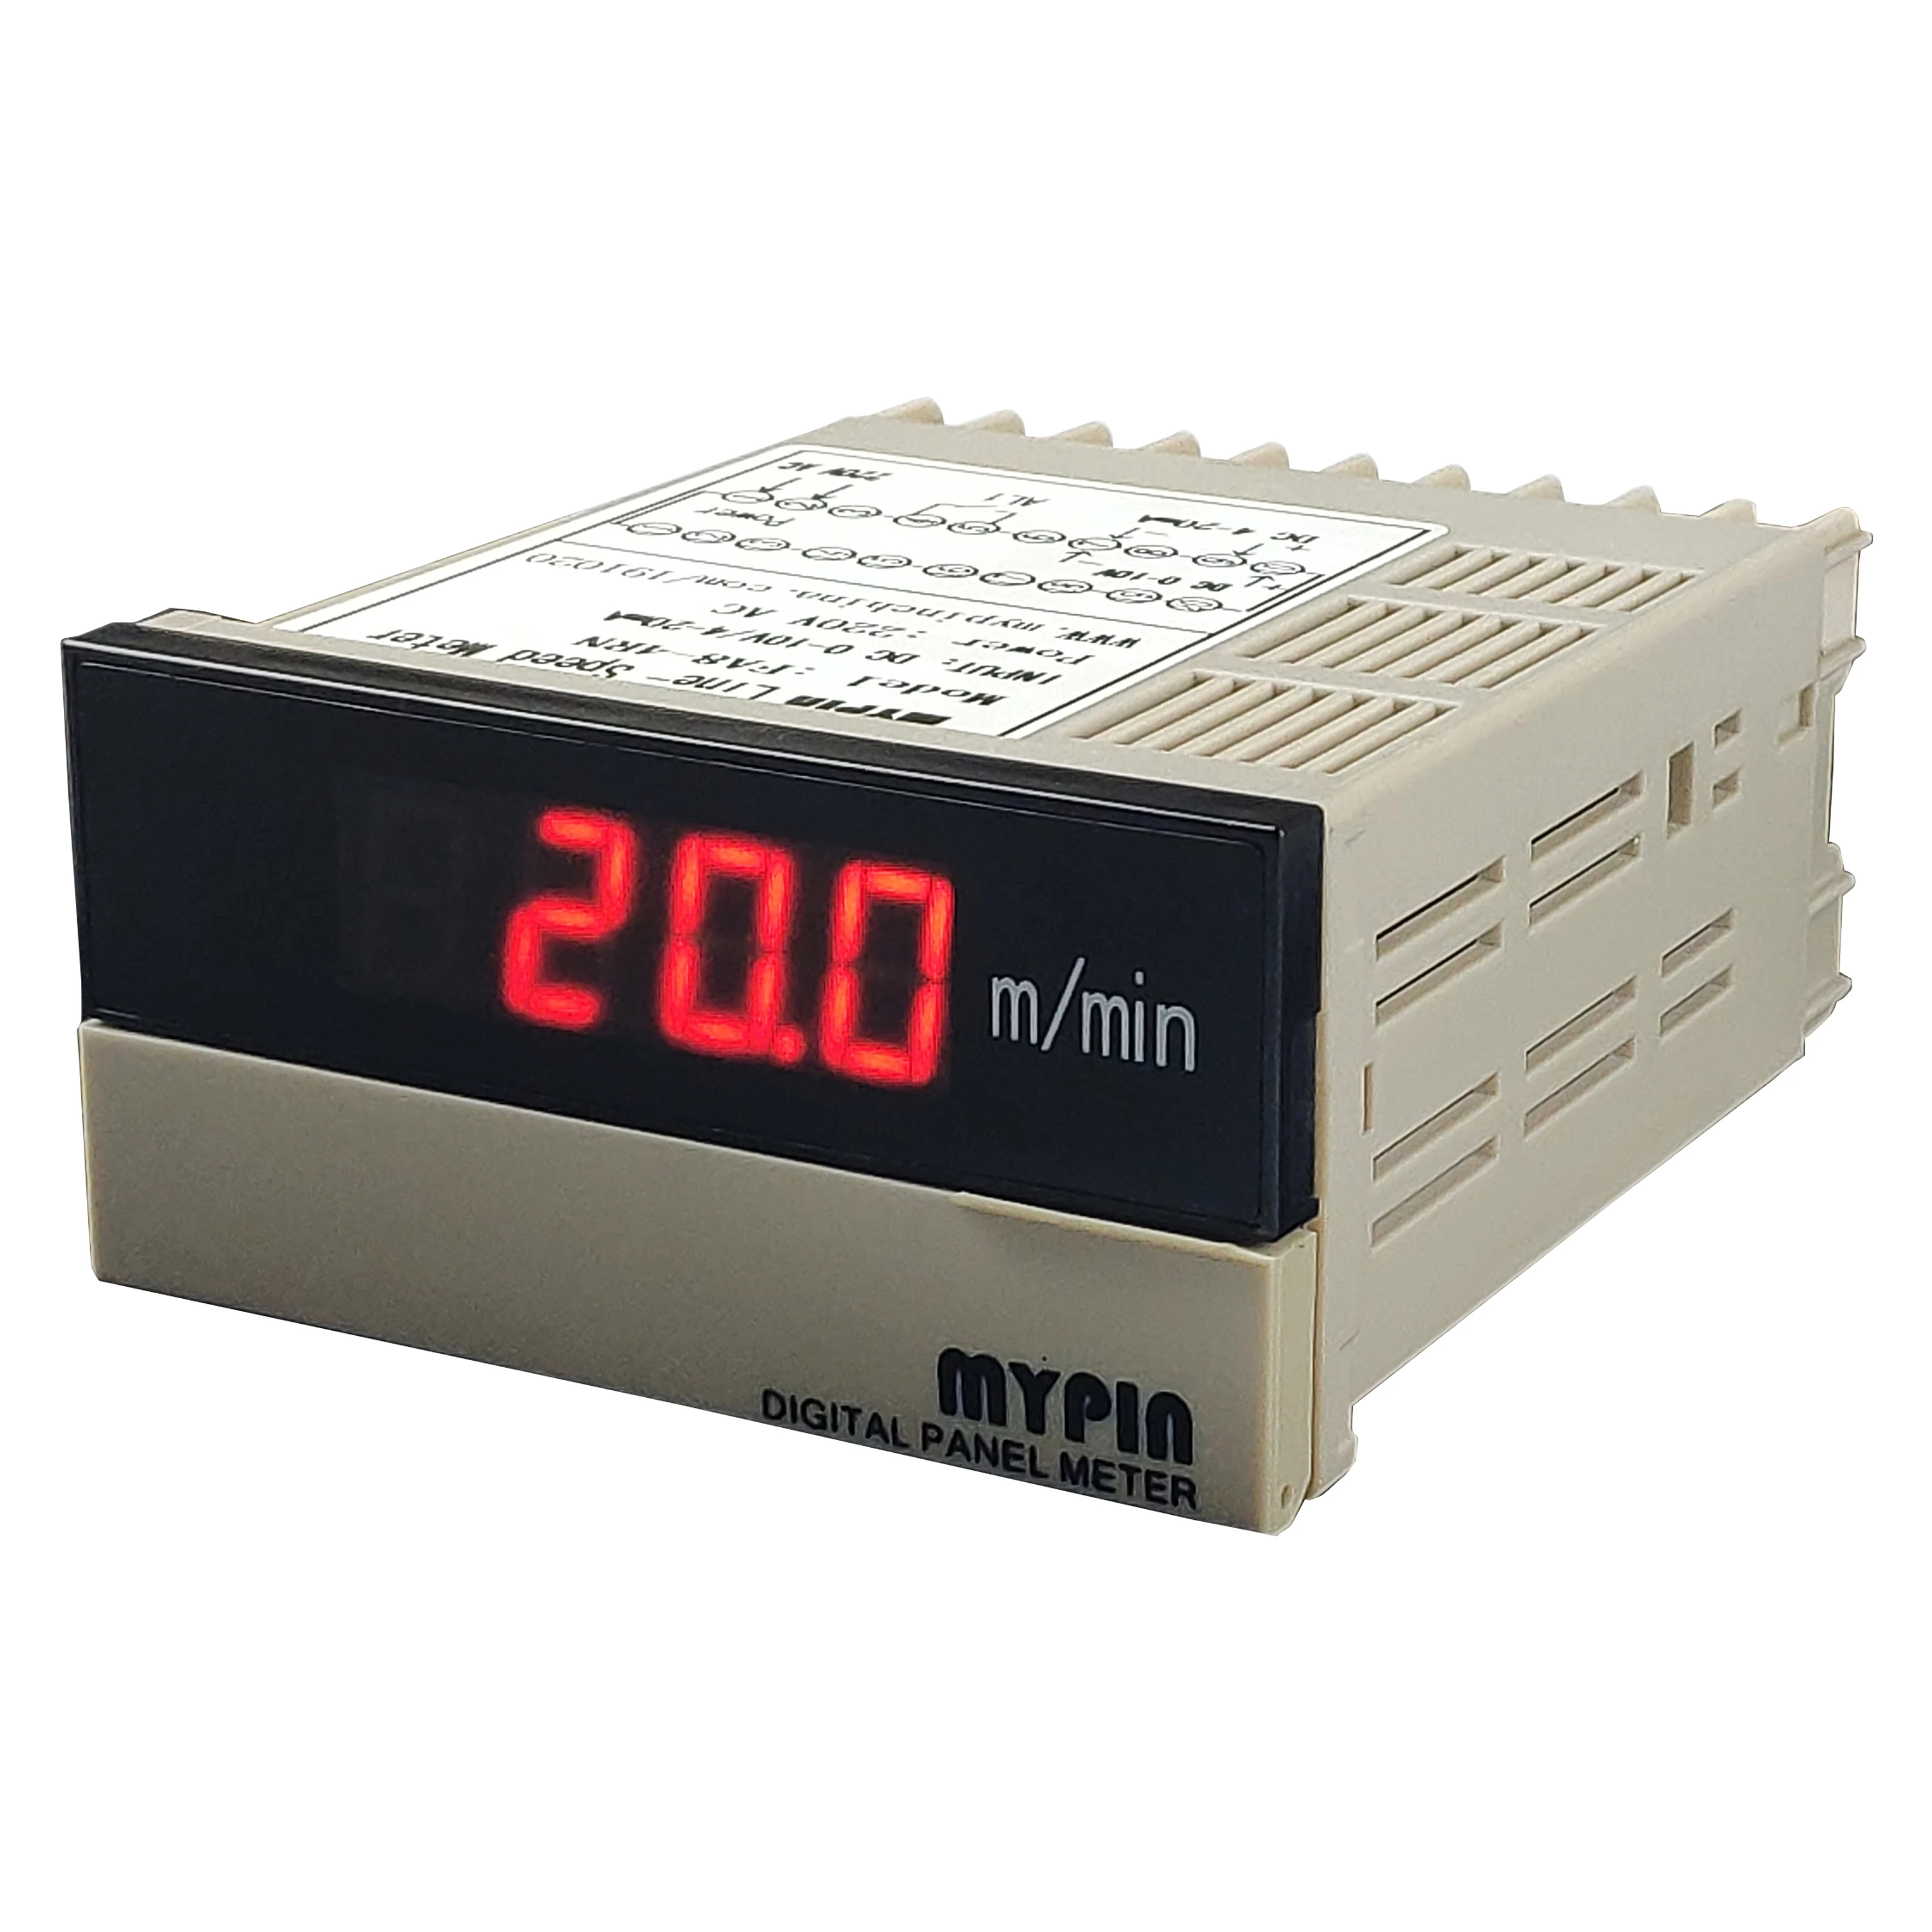 MYPIN (FA8-4IRRB) 4 Digits Frequency//RPM/HZ Meter/Tacho Counter meter (MYPIN)